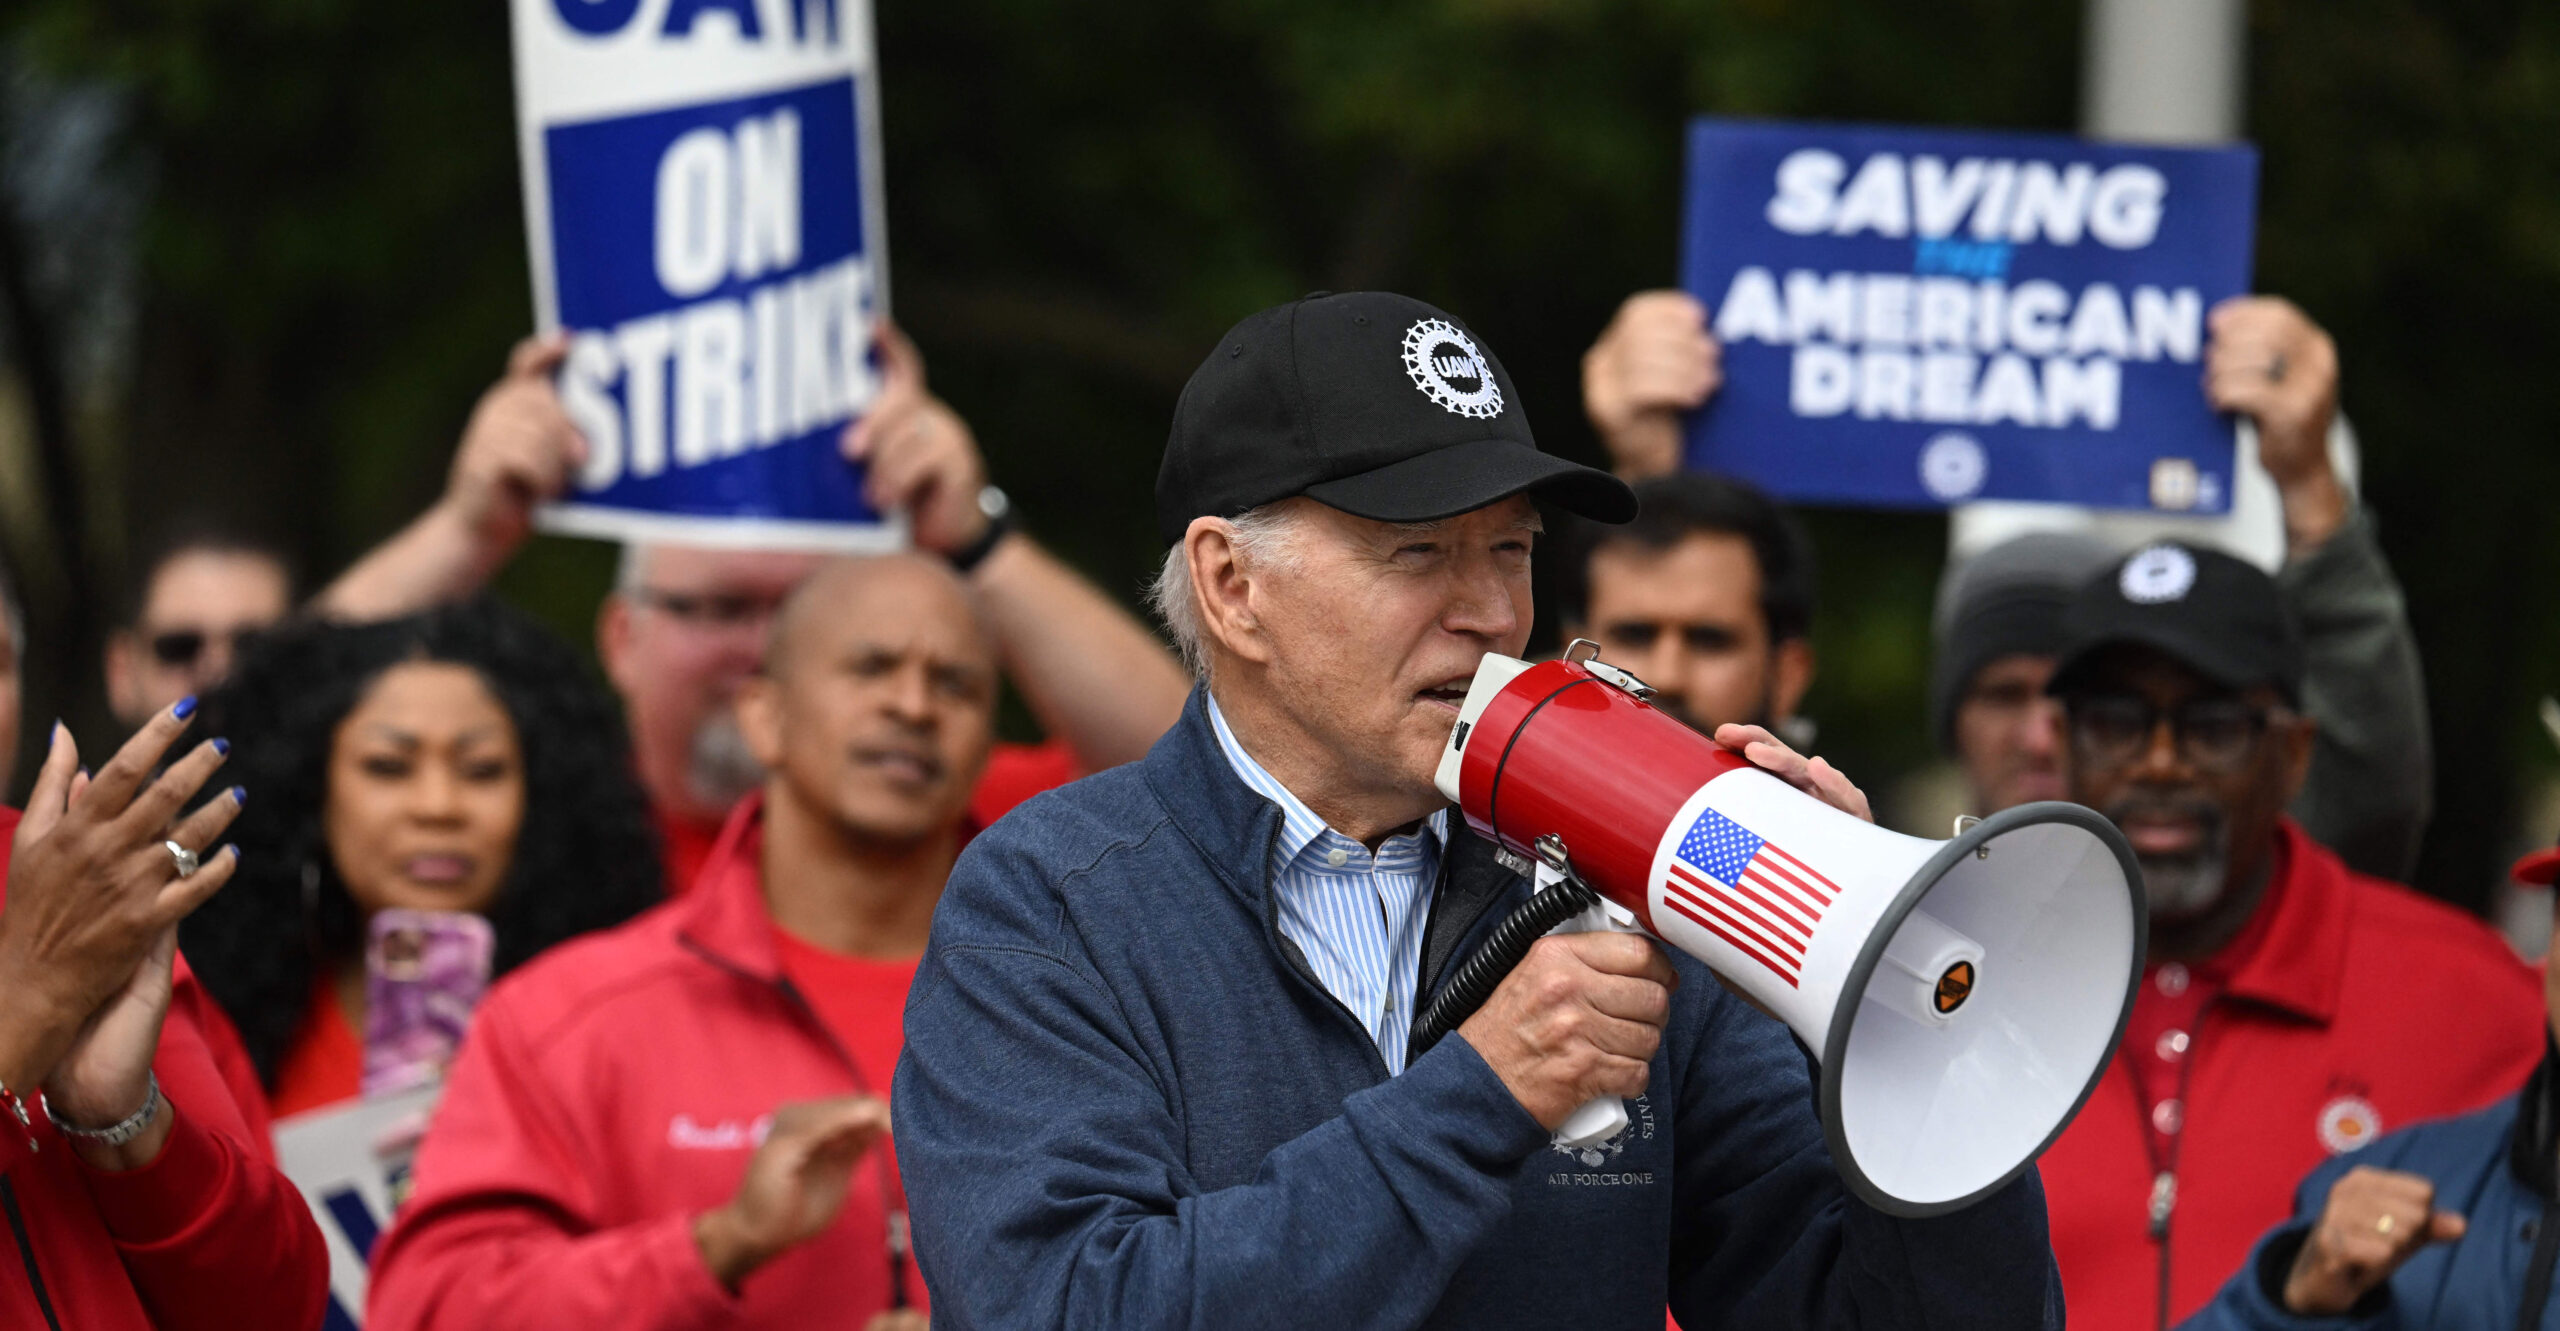 Biden Marches With Autoworkers While Causing Their Problems